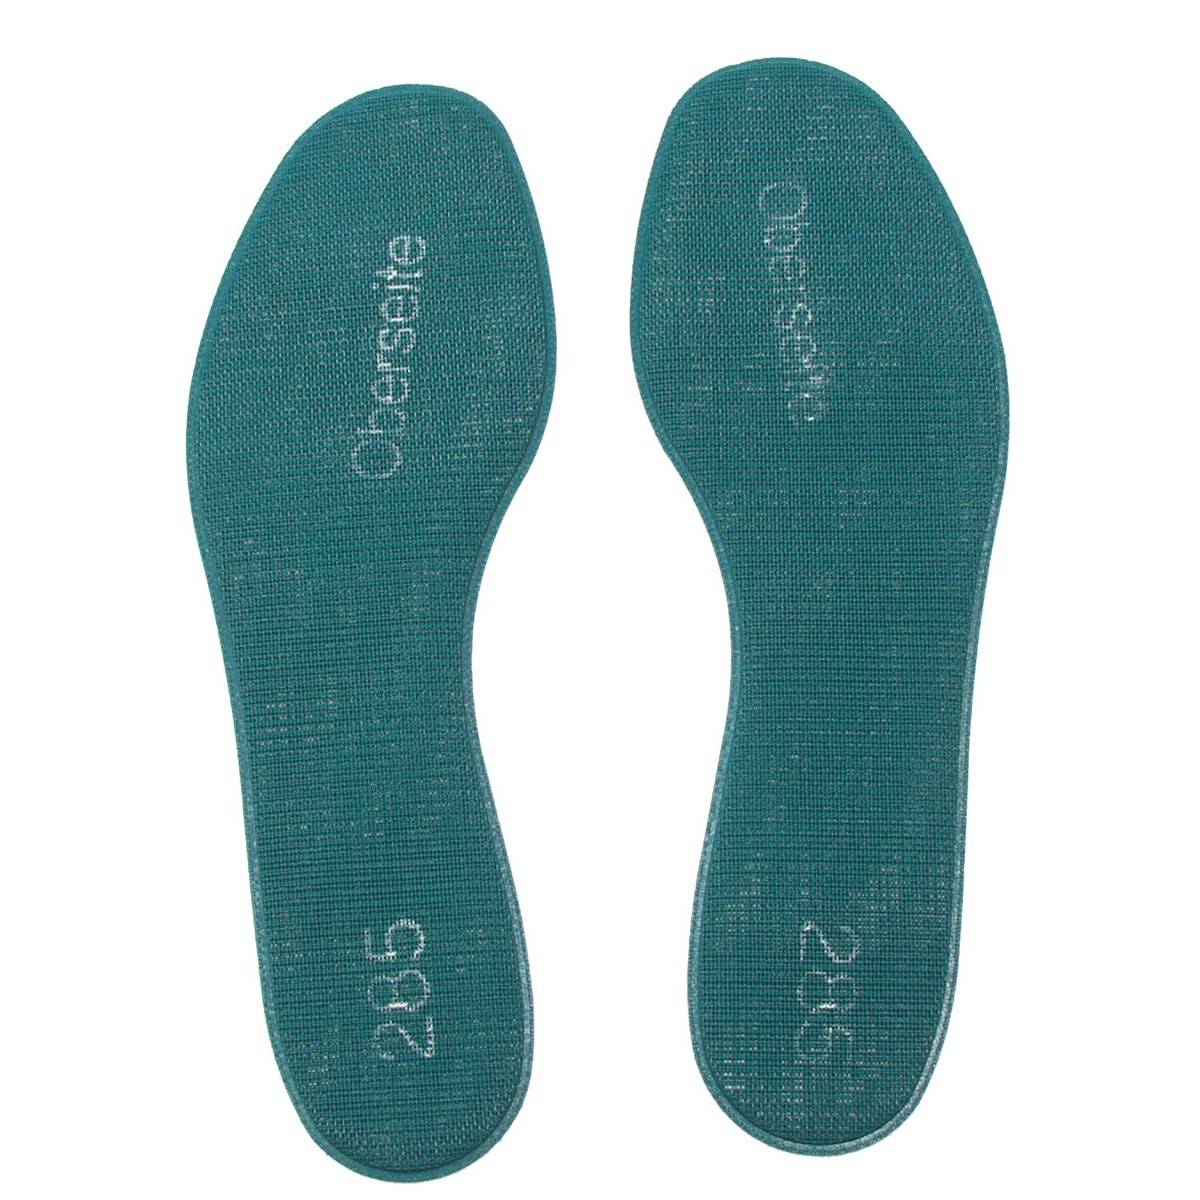 BUNDESWEHR GERMAN CANVAS BOOTS INSOLES, GREEN - LIKE NEW | Military ...